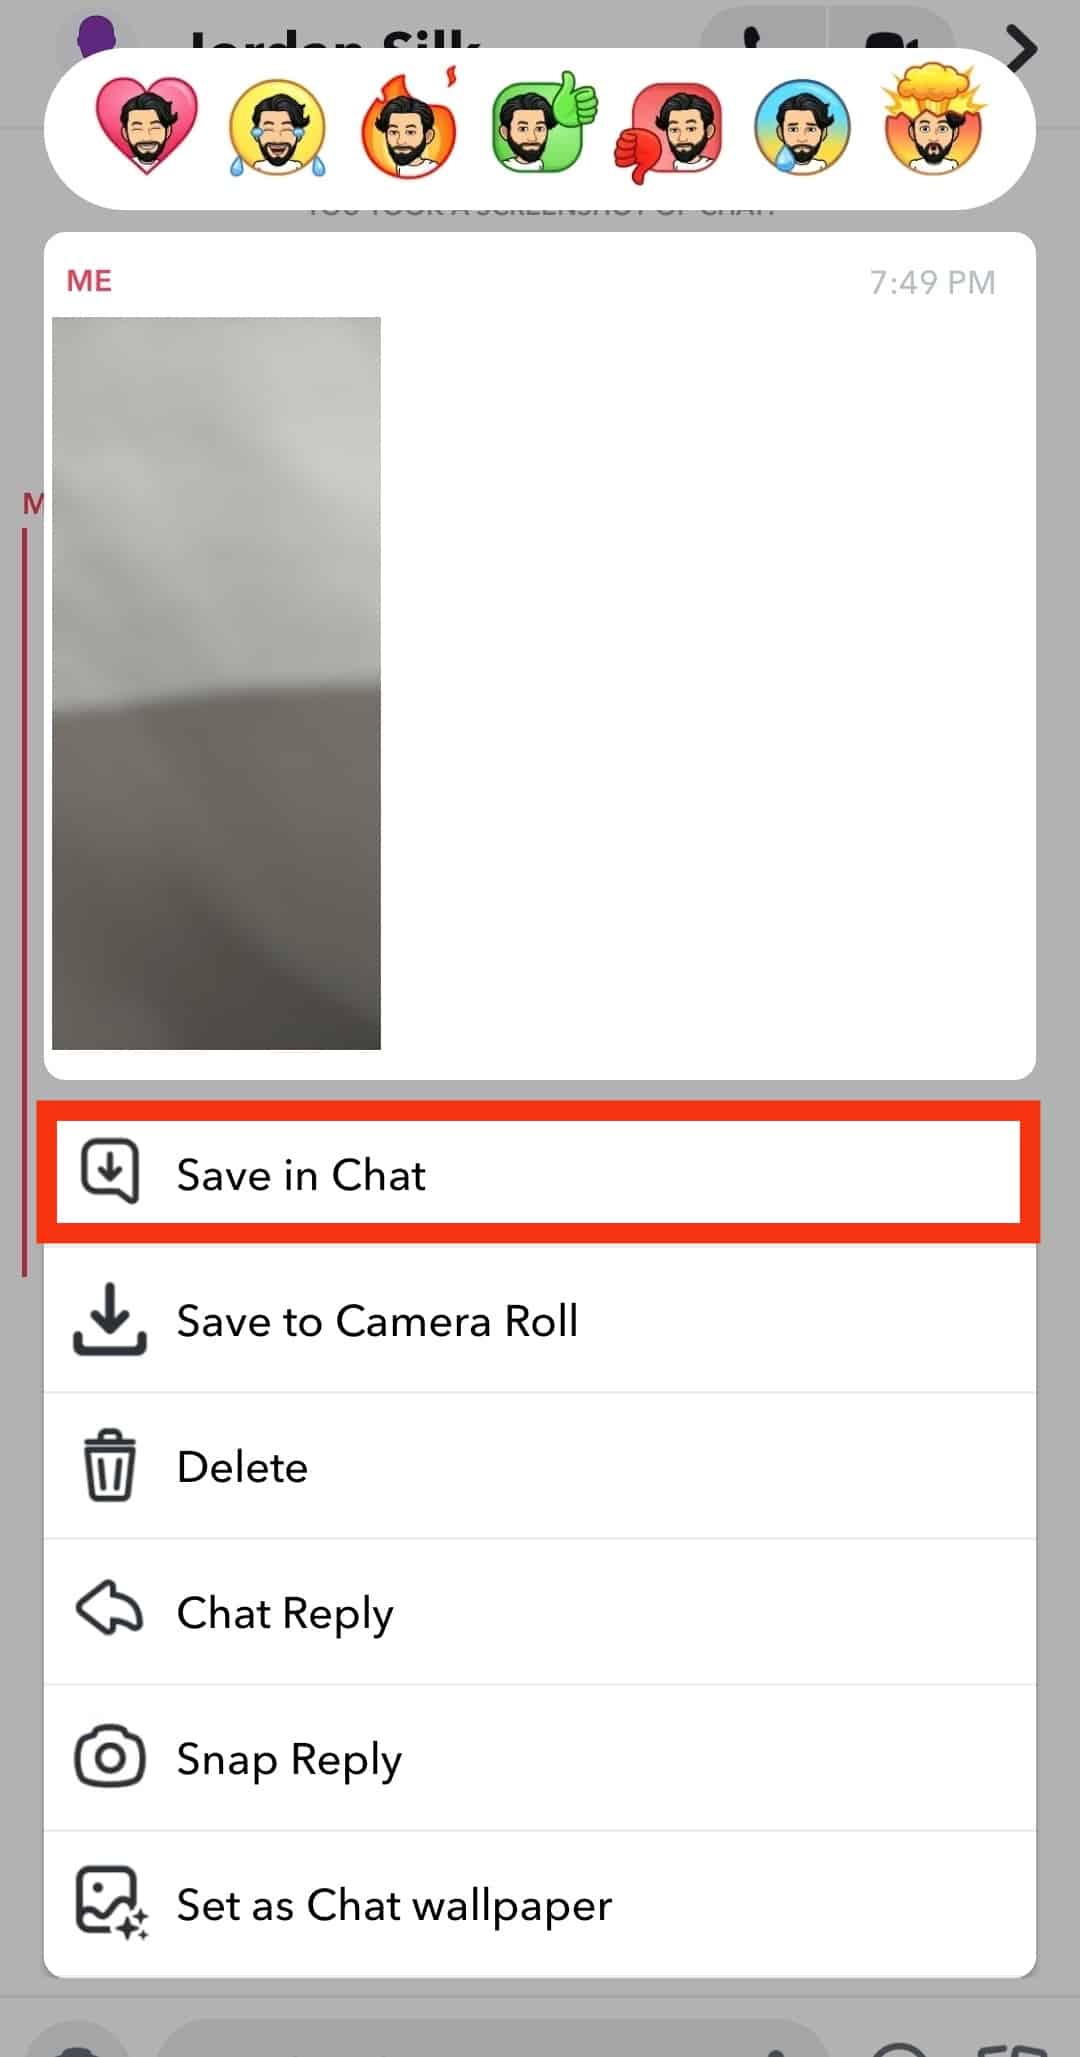 Choose The Save In Chat Option